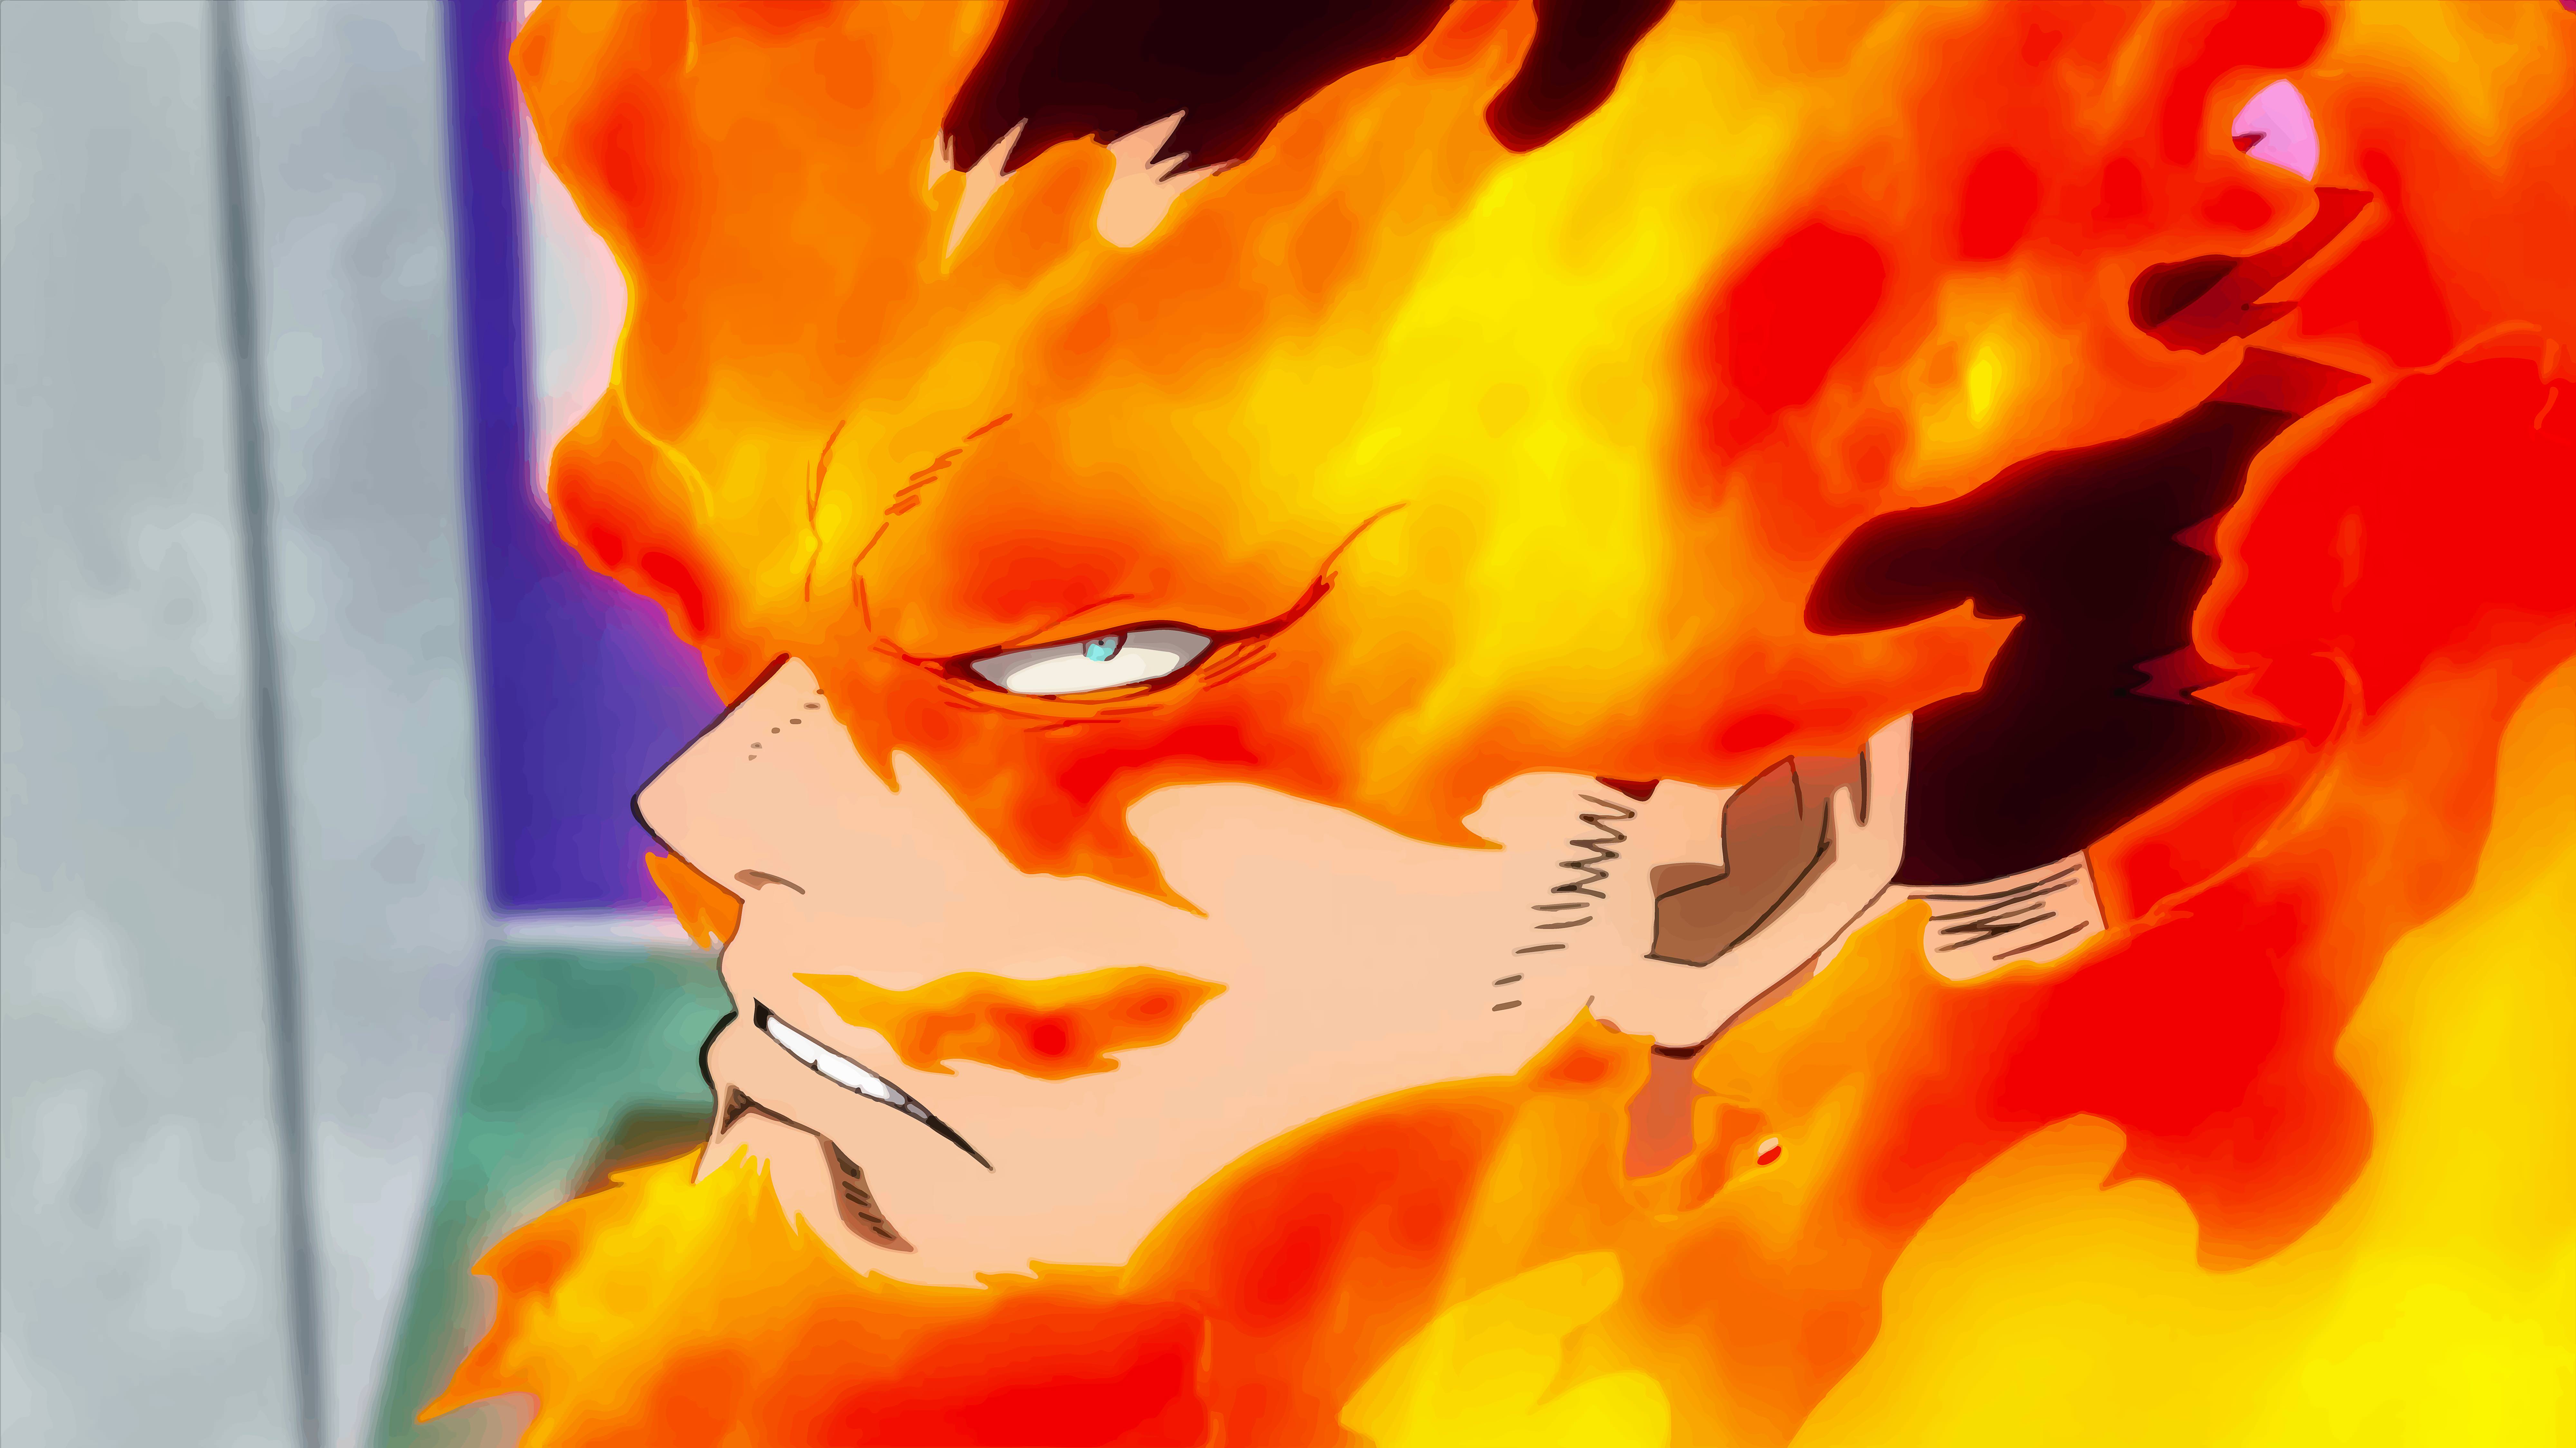 Endeavor glares at All Might from Boku no Hero Academia.